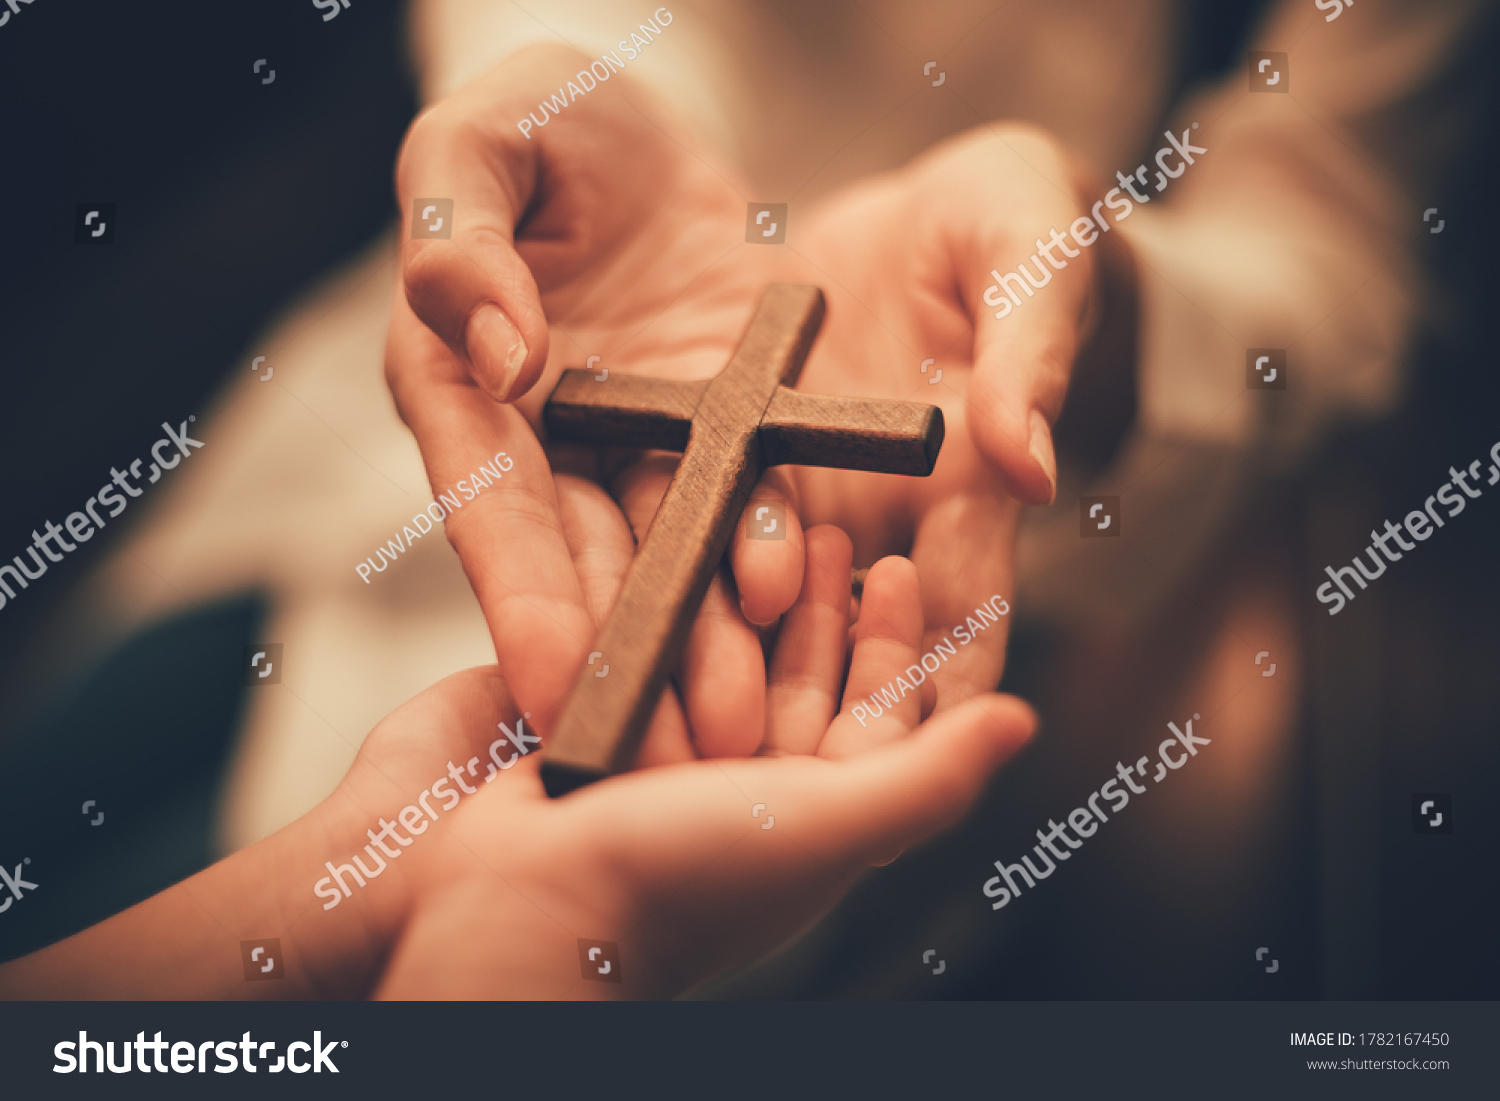 Woman's hand with cross .Concept of hope, faith, christianity, religion, church online. #1782167450